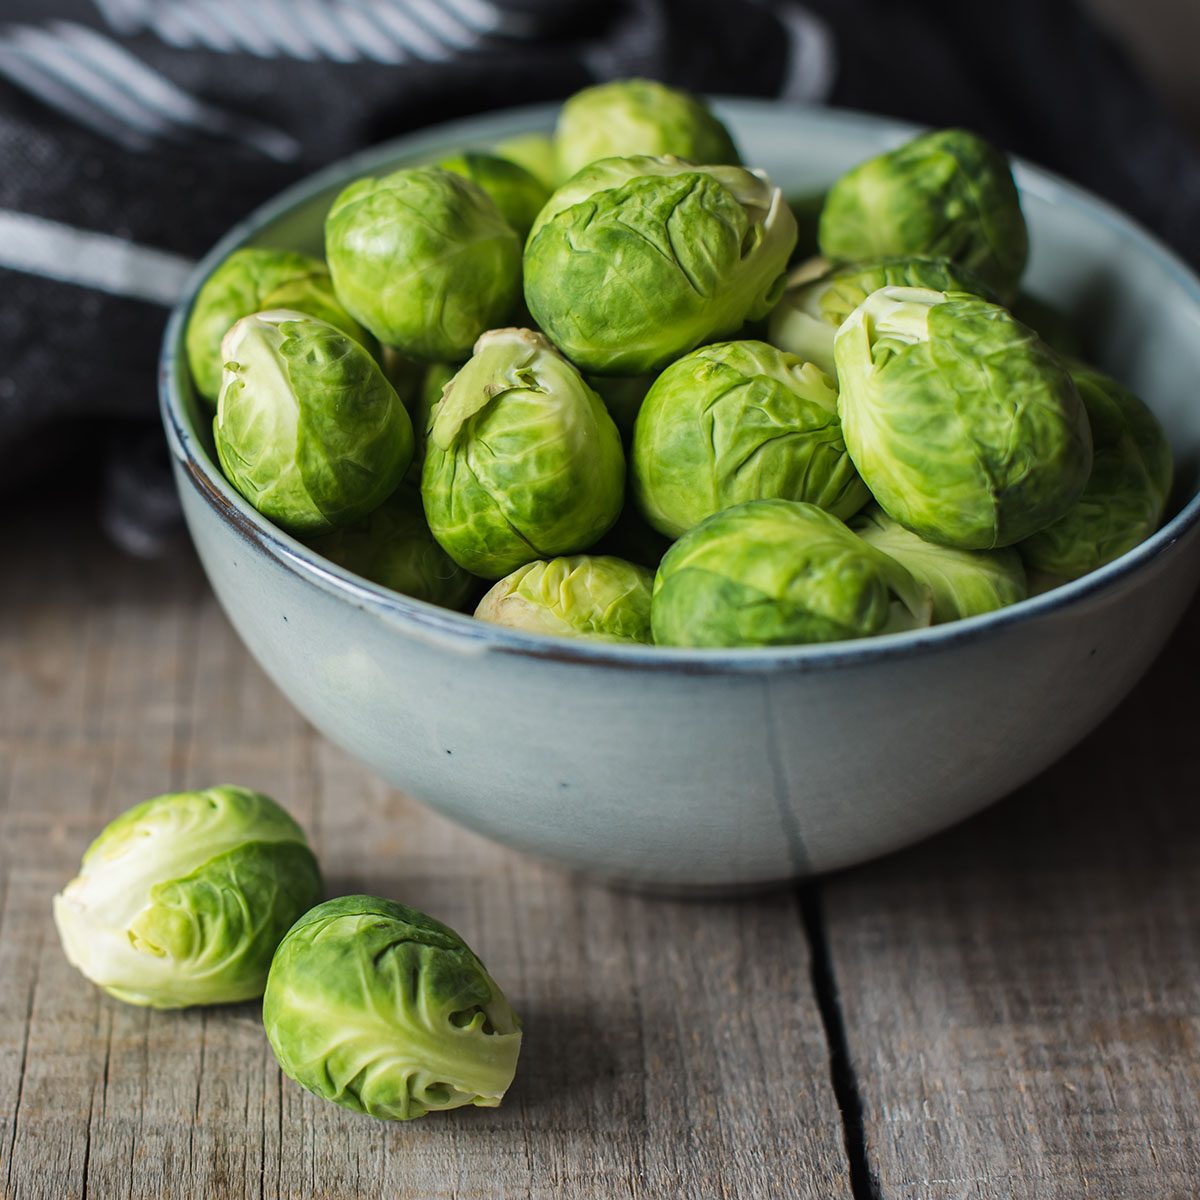 11 Health Benefits of Brussels Sprouts That Make Them Worth Trying